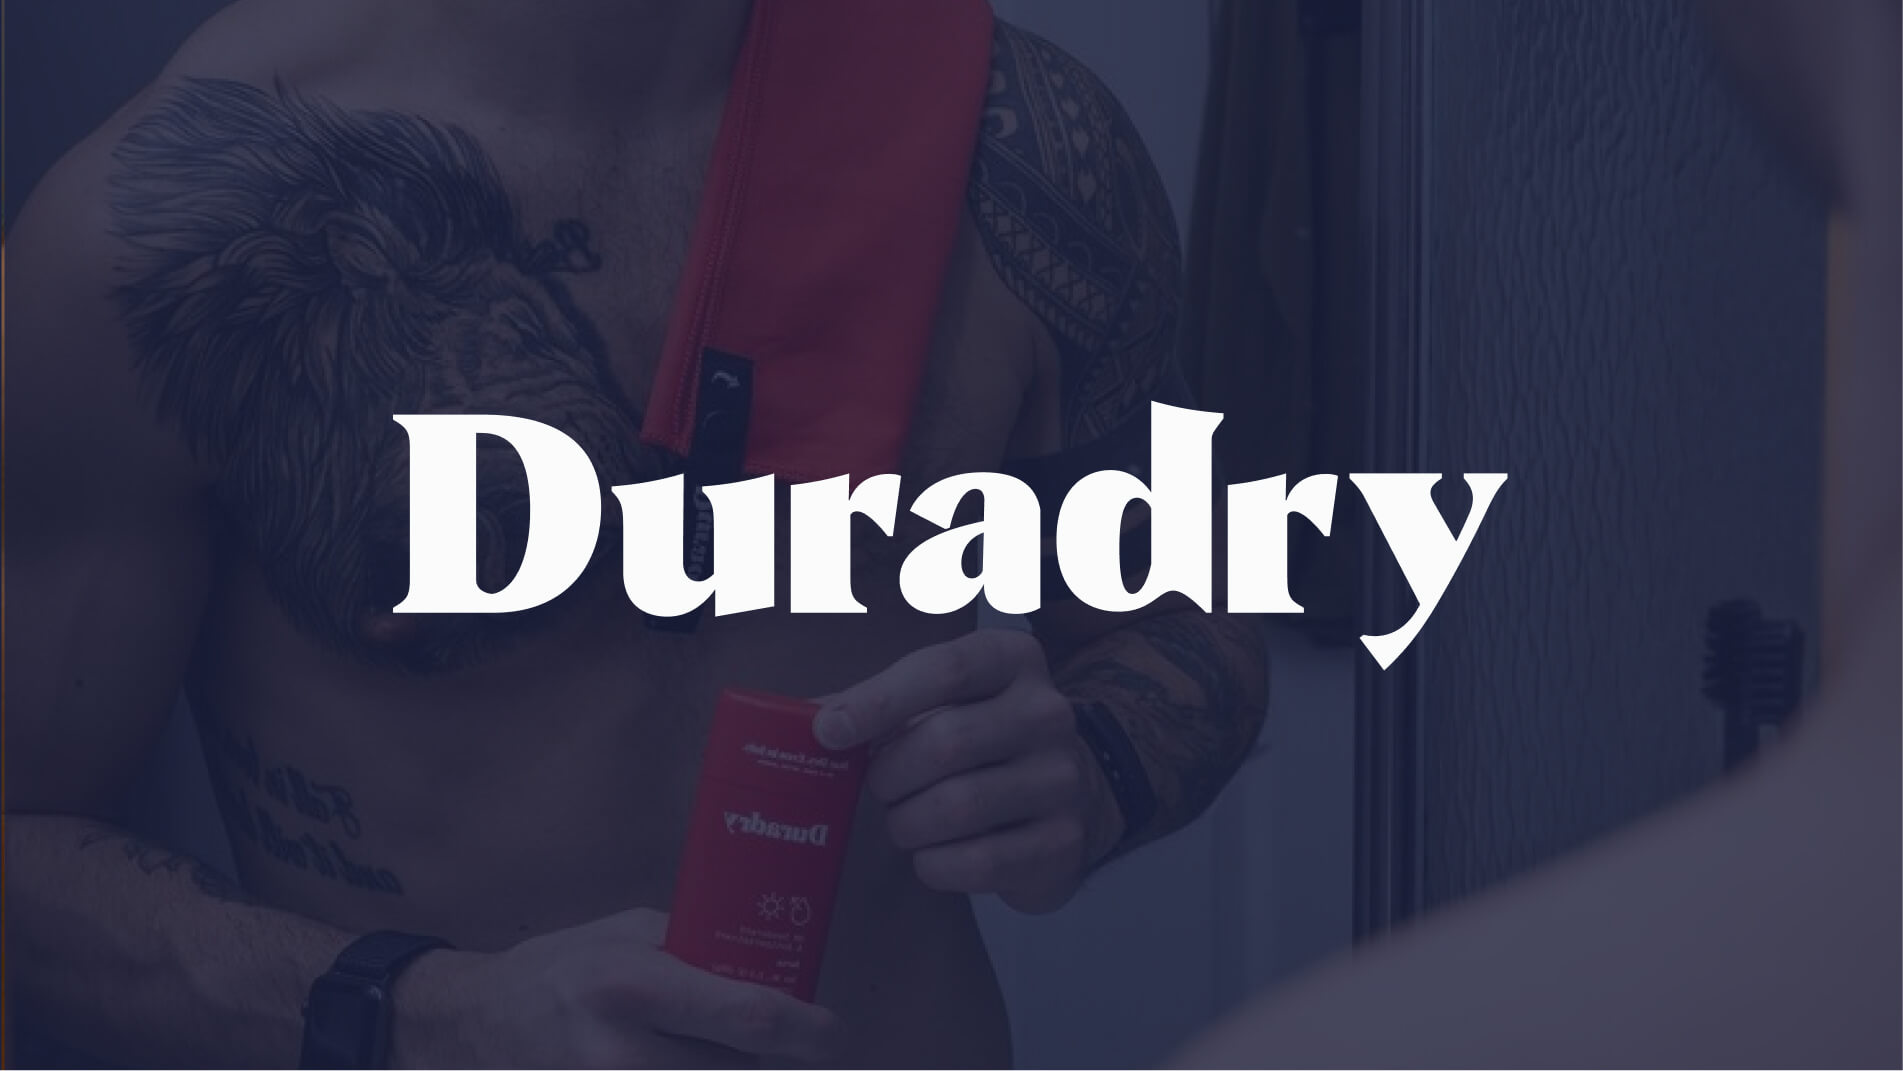 Duradry logo over an image of a model using Duradry products